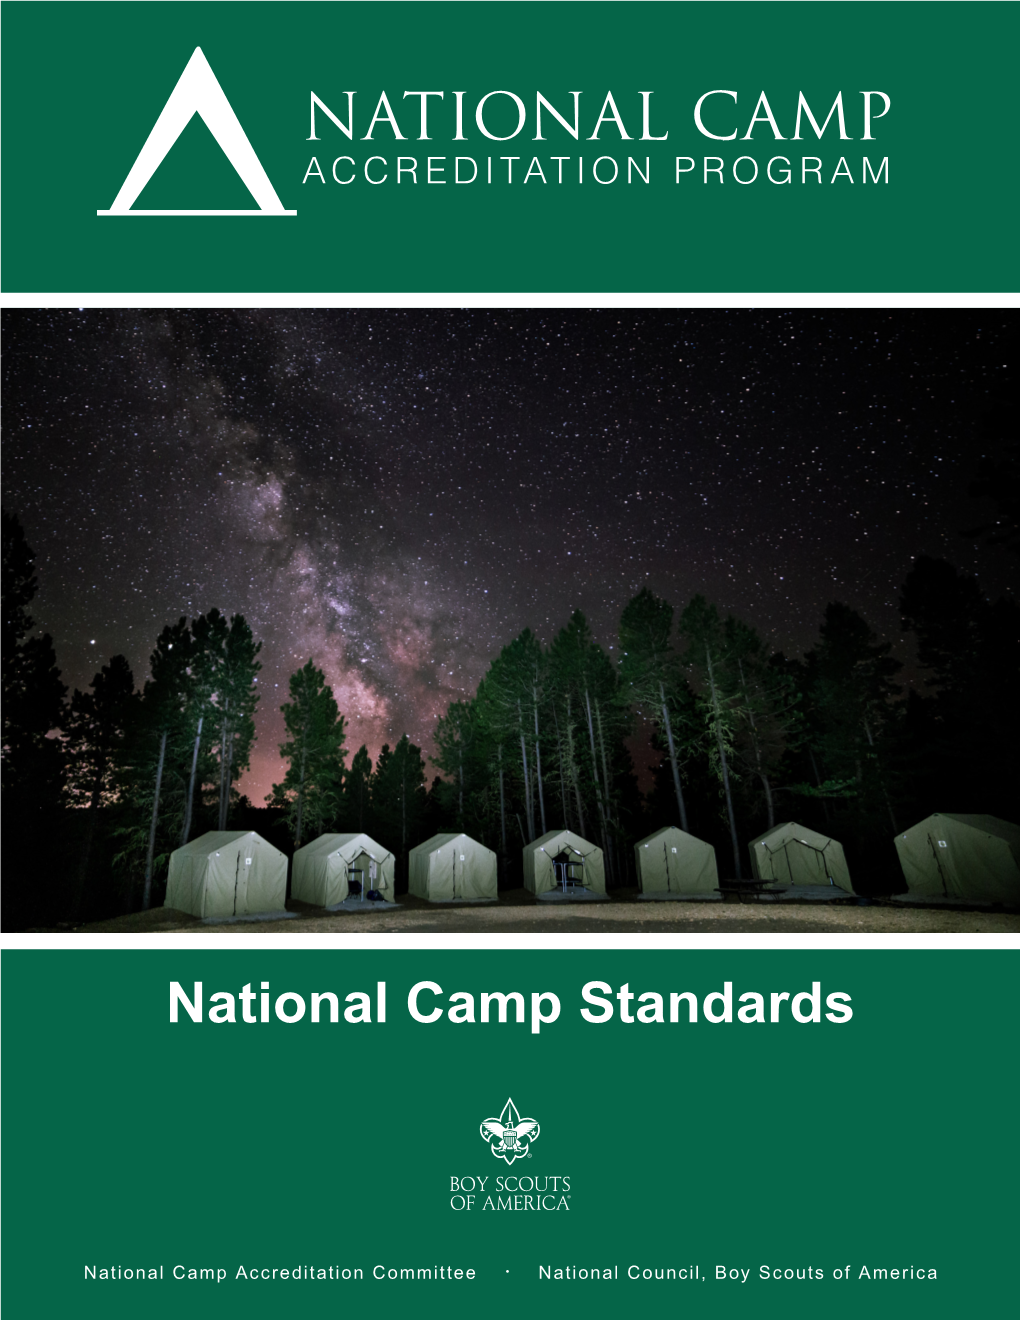 2021 National Camp Accreditation Standards